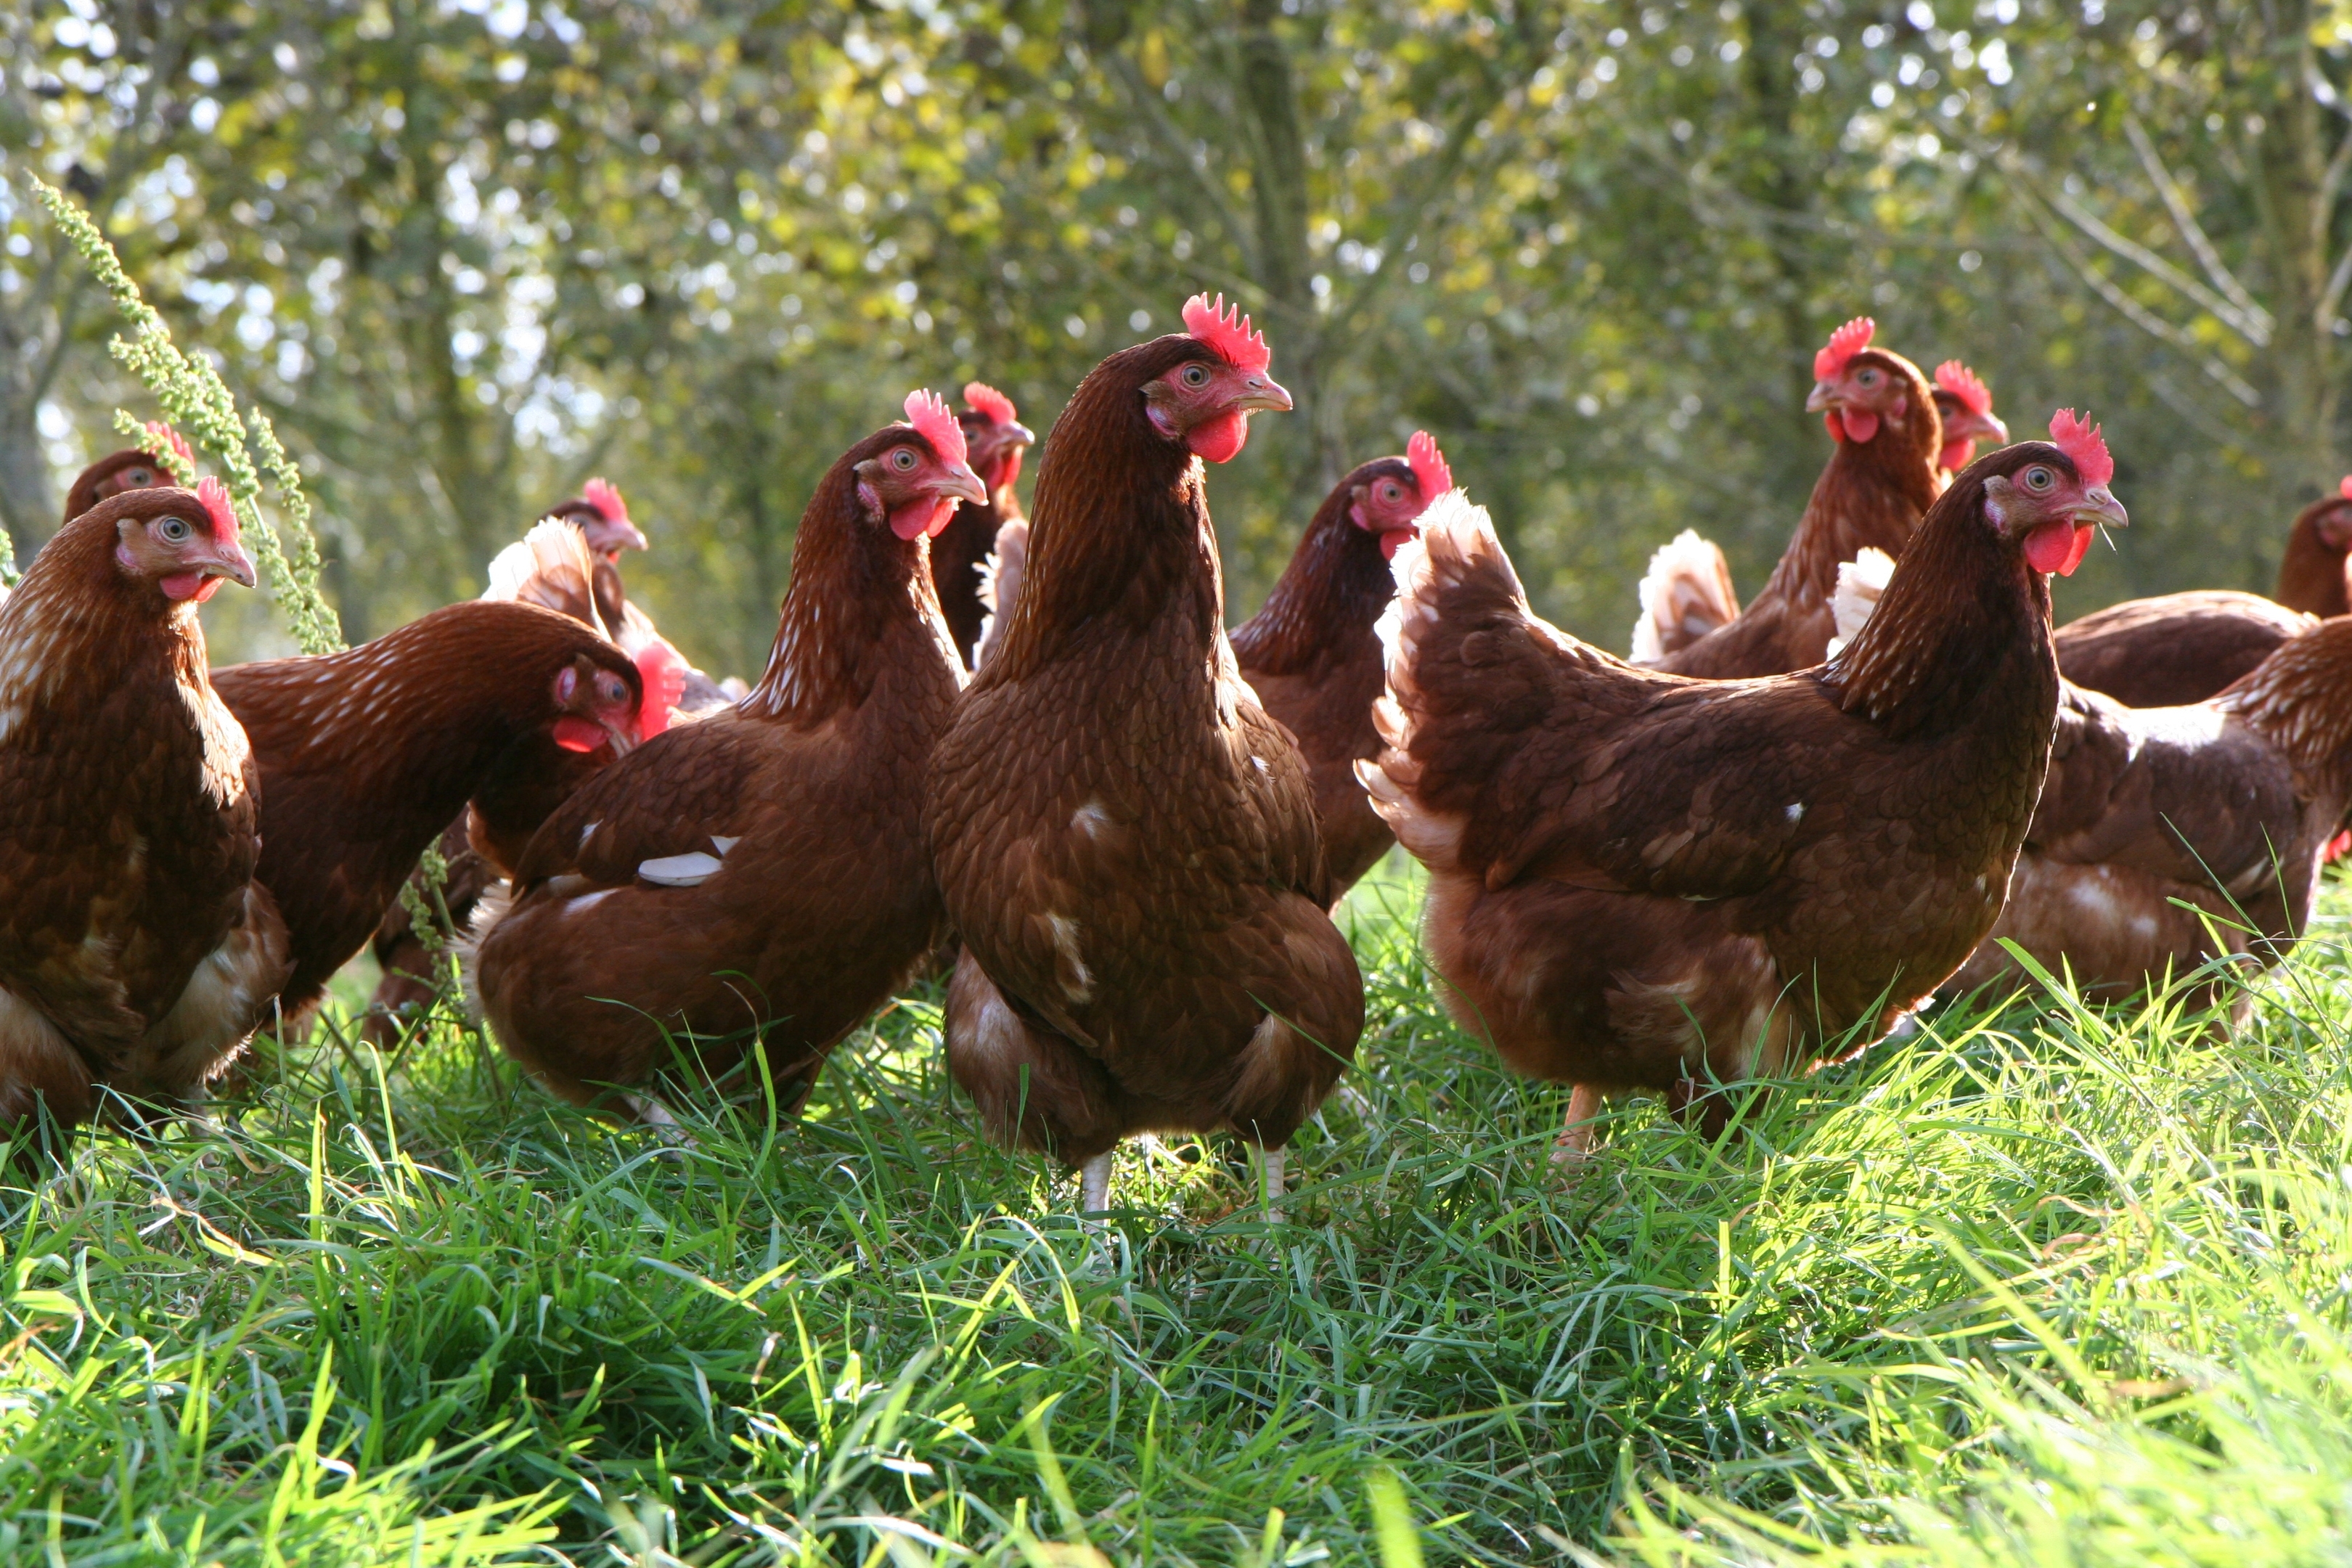 Poultry keepers need to take steps to protect their outdoor flocks